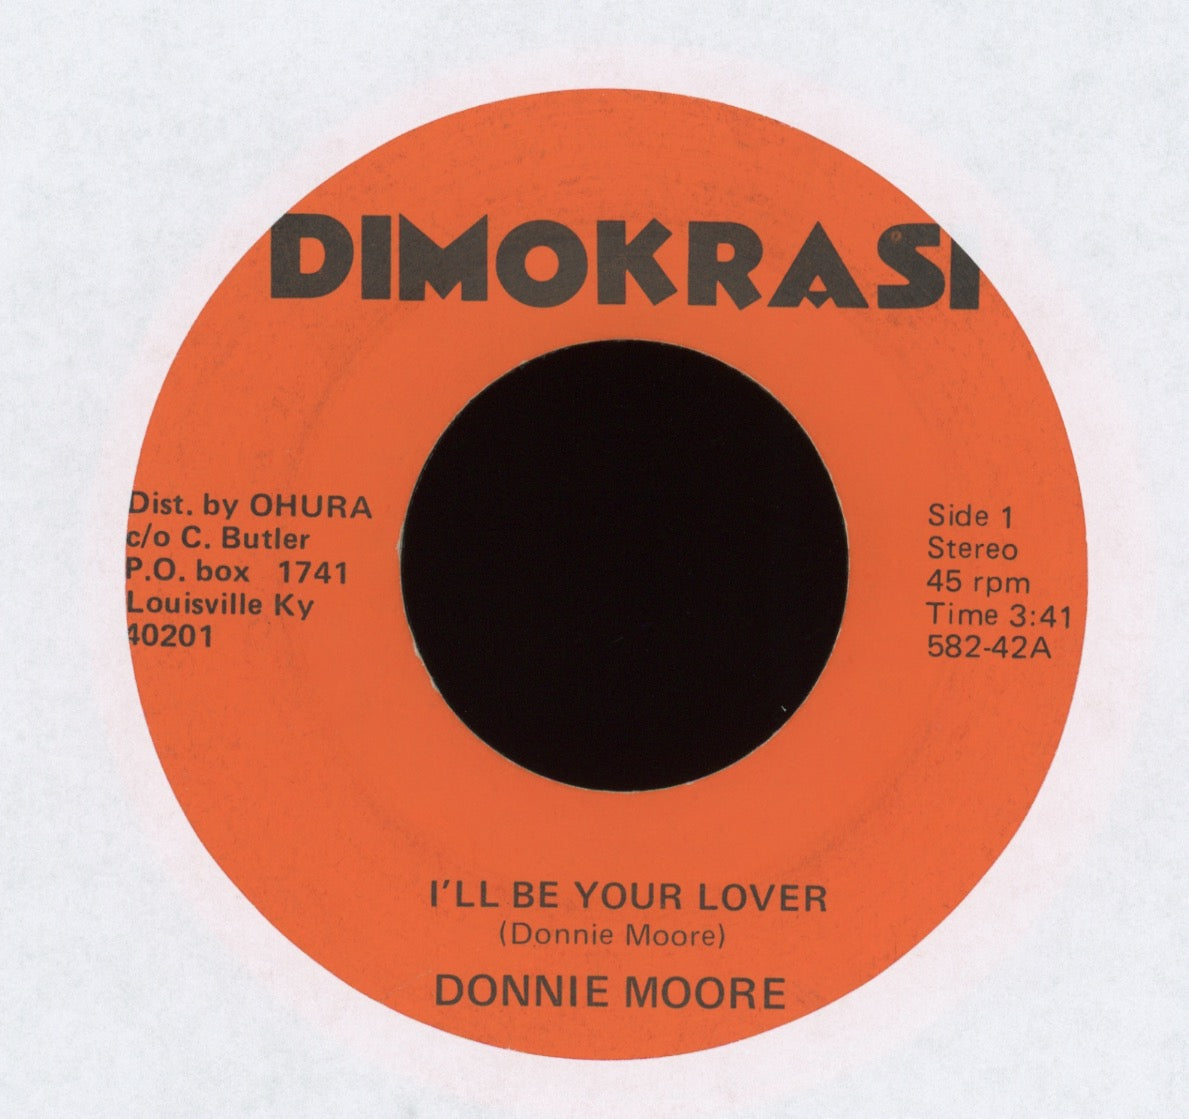 Donald Moore - I'll Be Your Lover on Dimokrasi